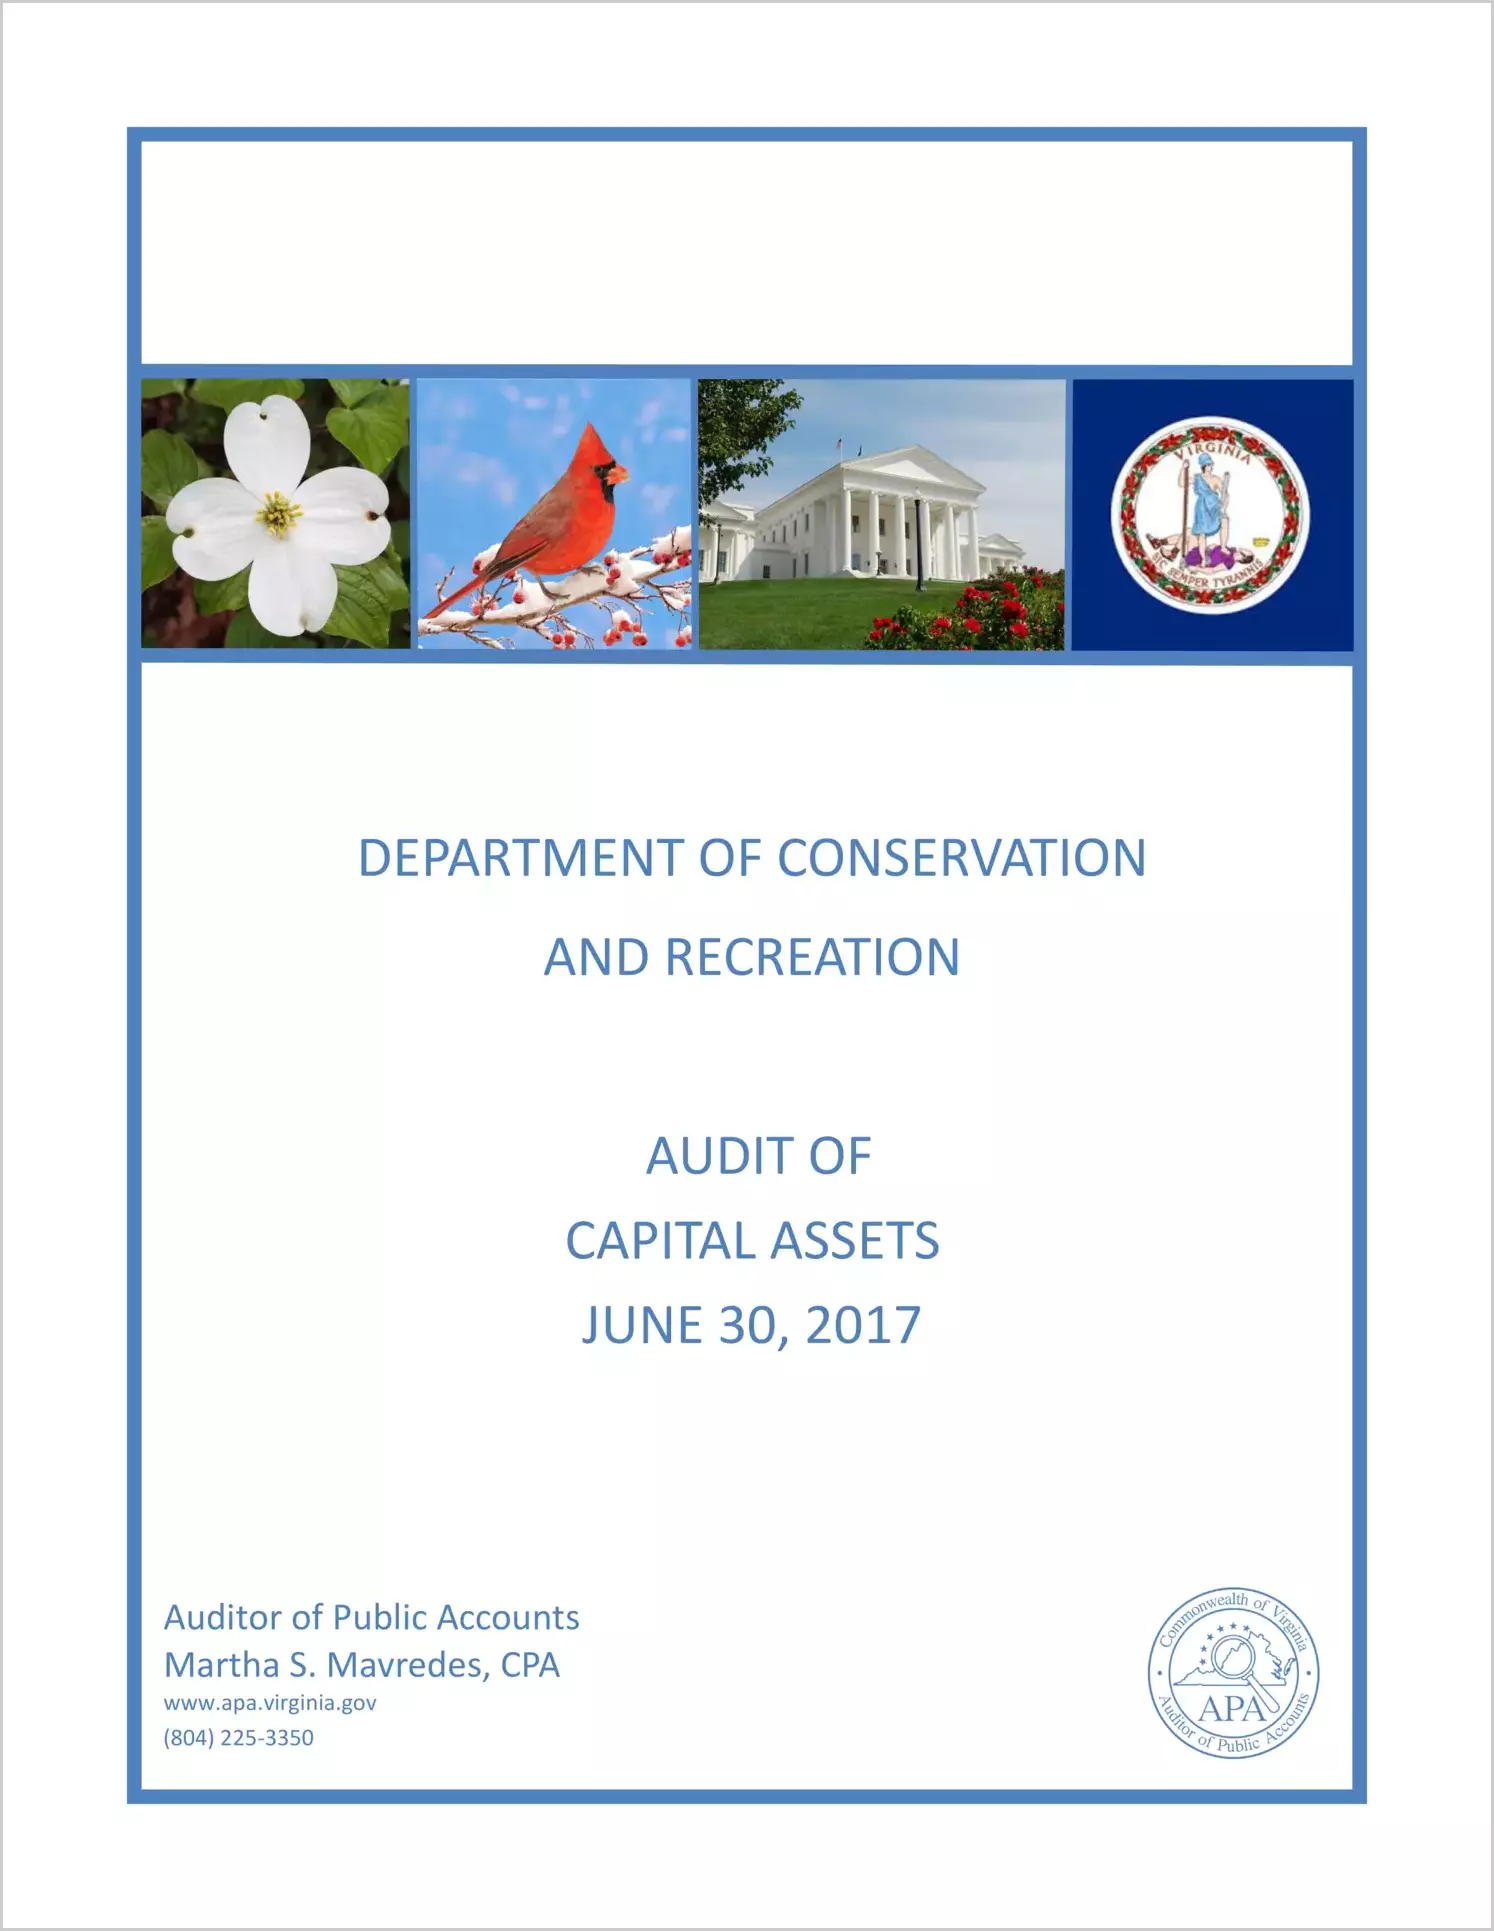 Department of Conservation and Recreation Audit of Capital Assets as of June 30, 2017